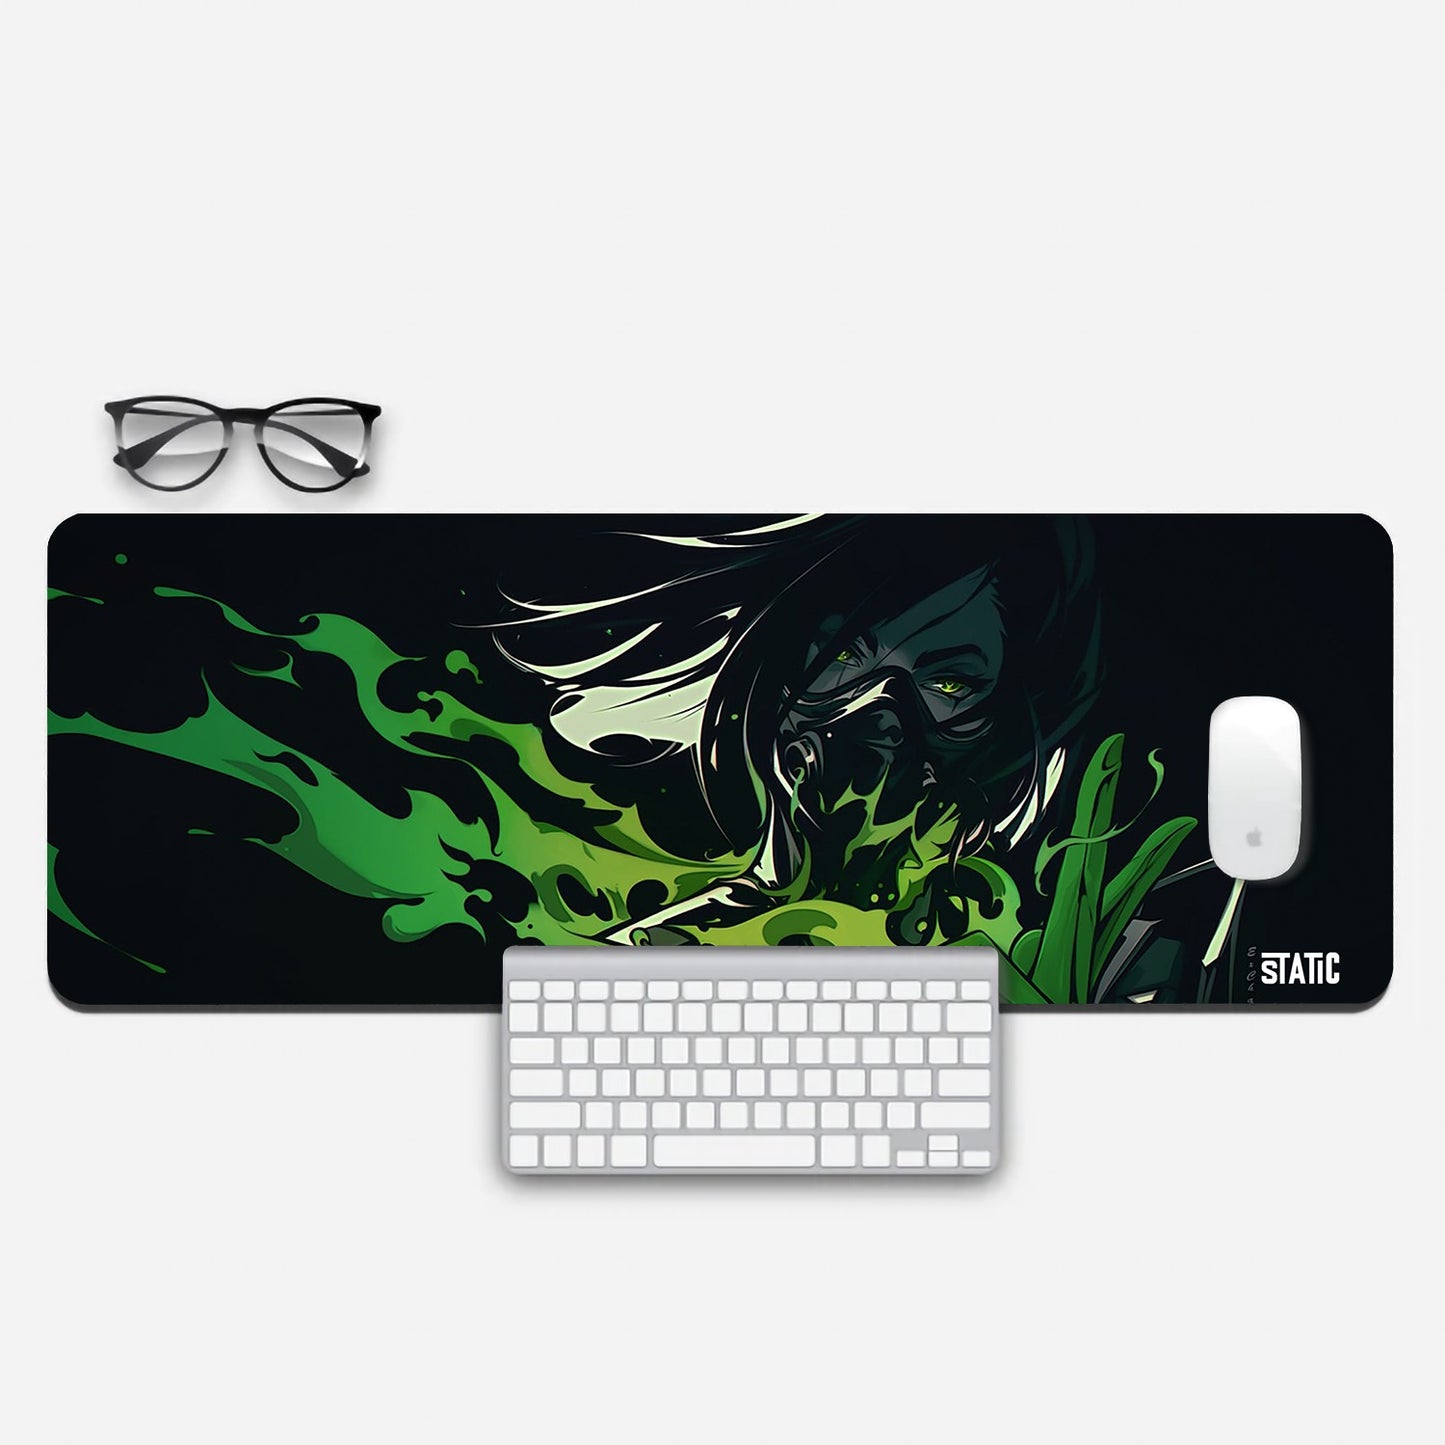 Elevate your gaming experience with our Extended Gaming Mouse Pad featuring Viper, the toxic expert from Valorant. Immerse yourself in her deadly abilities as she stands amidst vibrant green toxic fumes. Gain the edge in your gameplay with precision and style. Upgrade your setup with this unique mouse pad and step into the world of Valorant like never before!